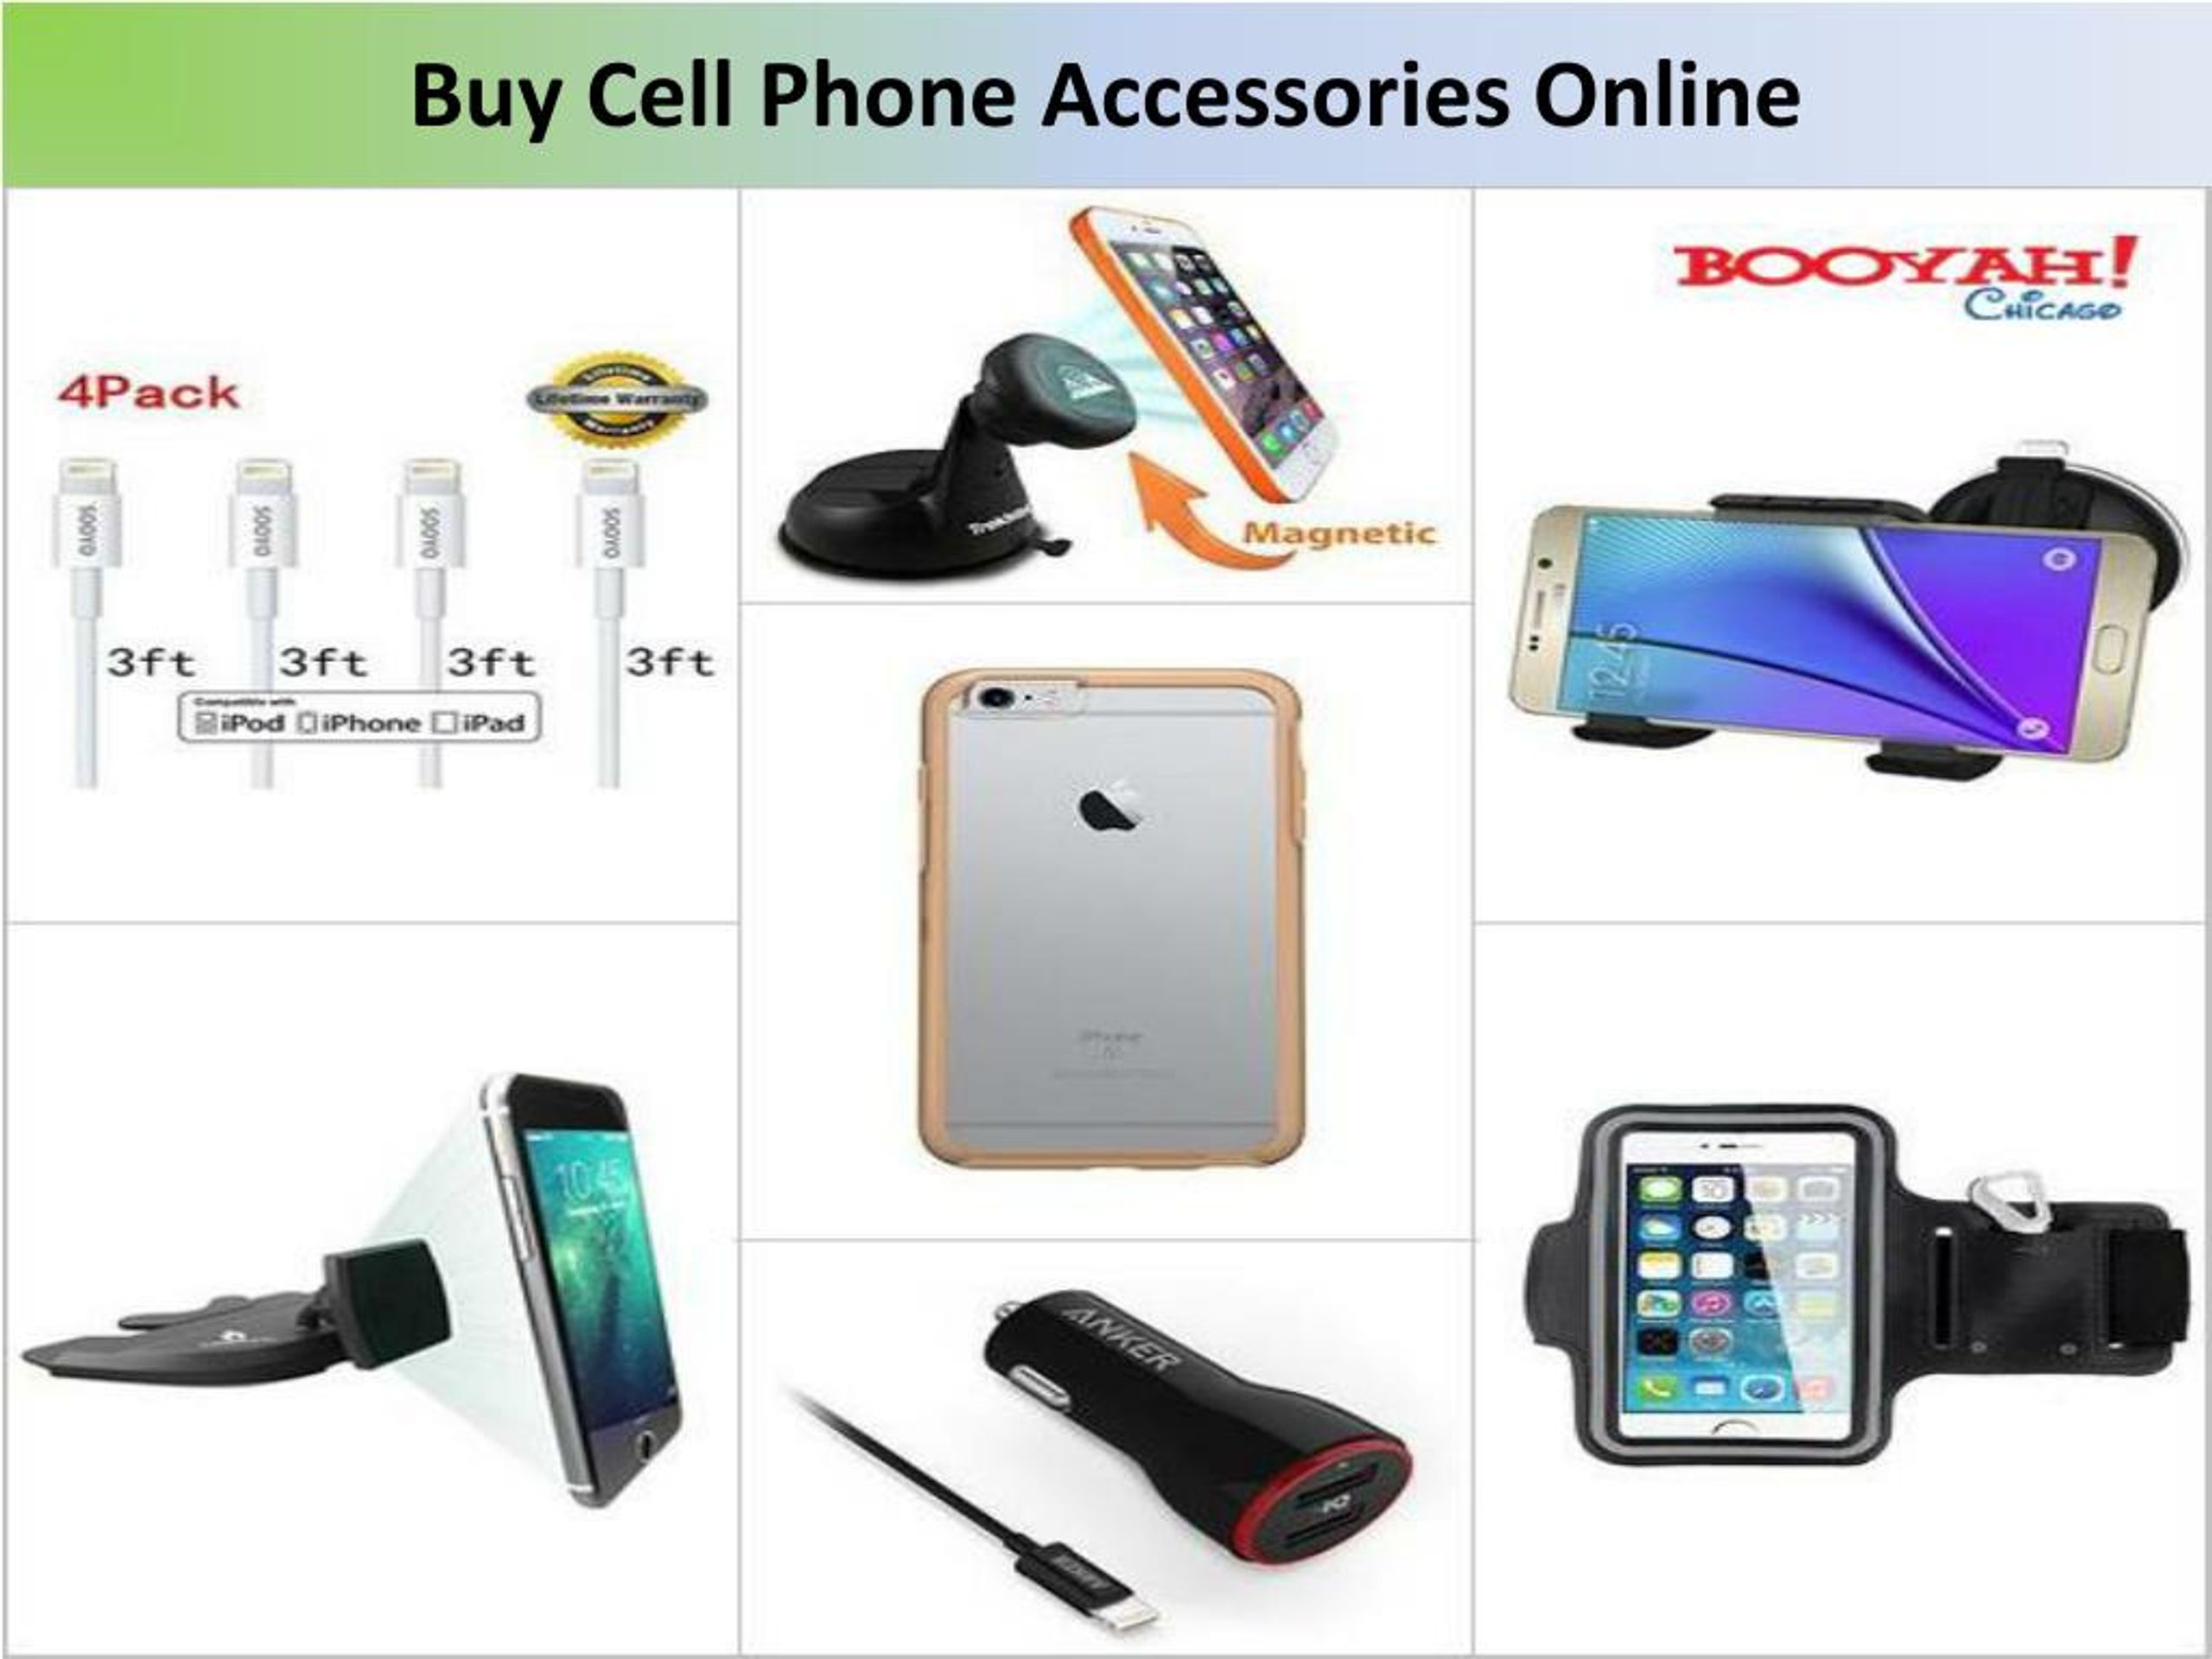 PPT - Cell Phone Accessories Online 